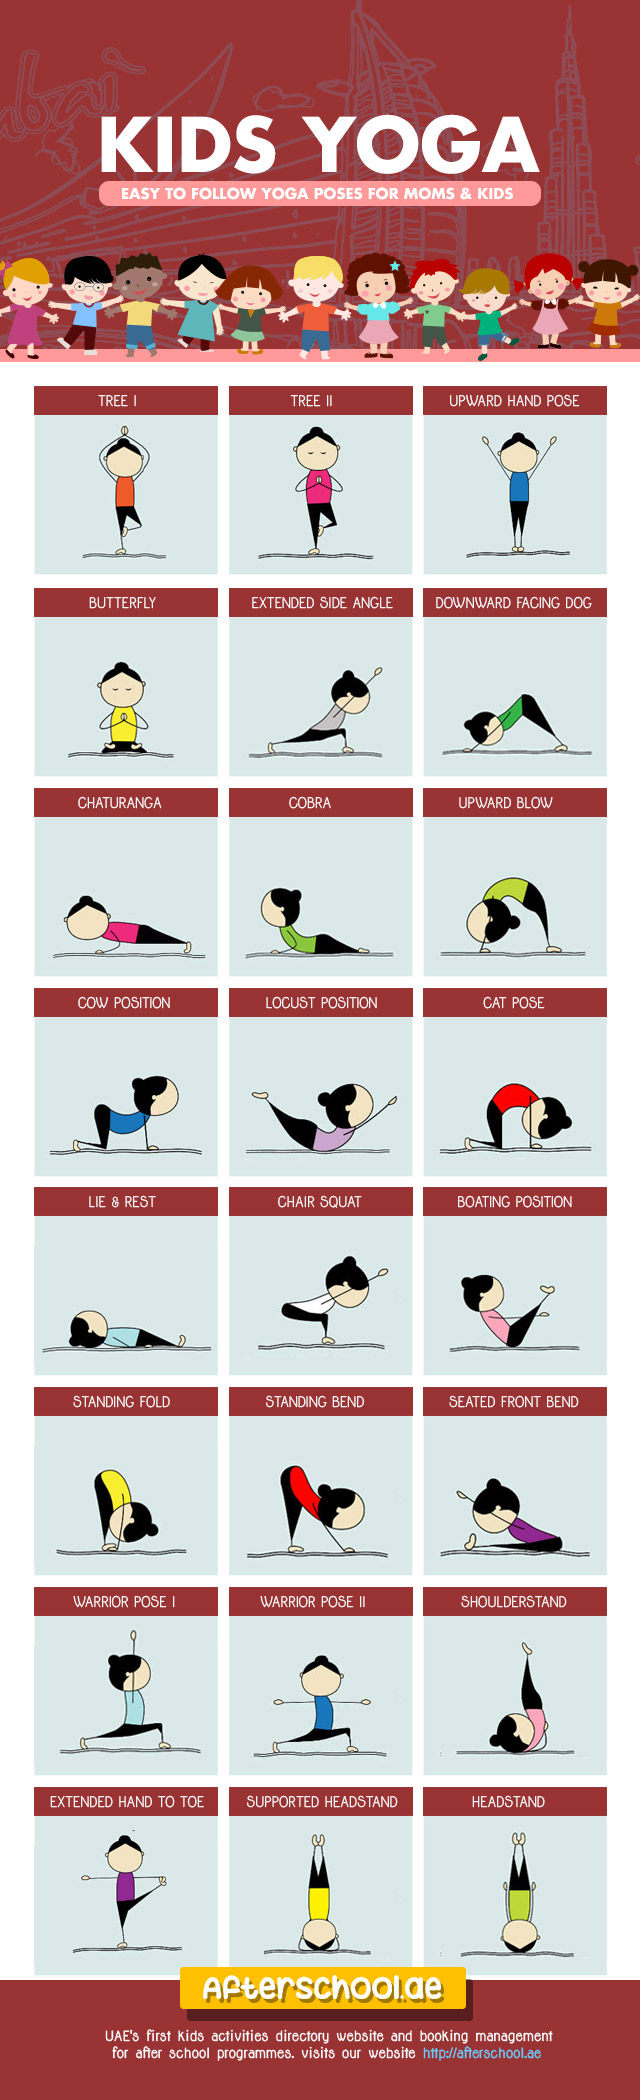 Family Yoga Time: Postures for Mom and Kids to Practice Together - Infographic